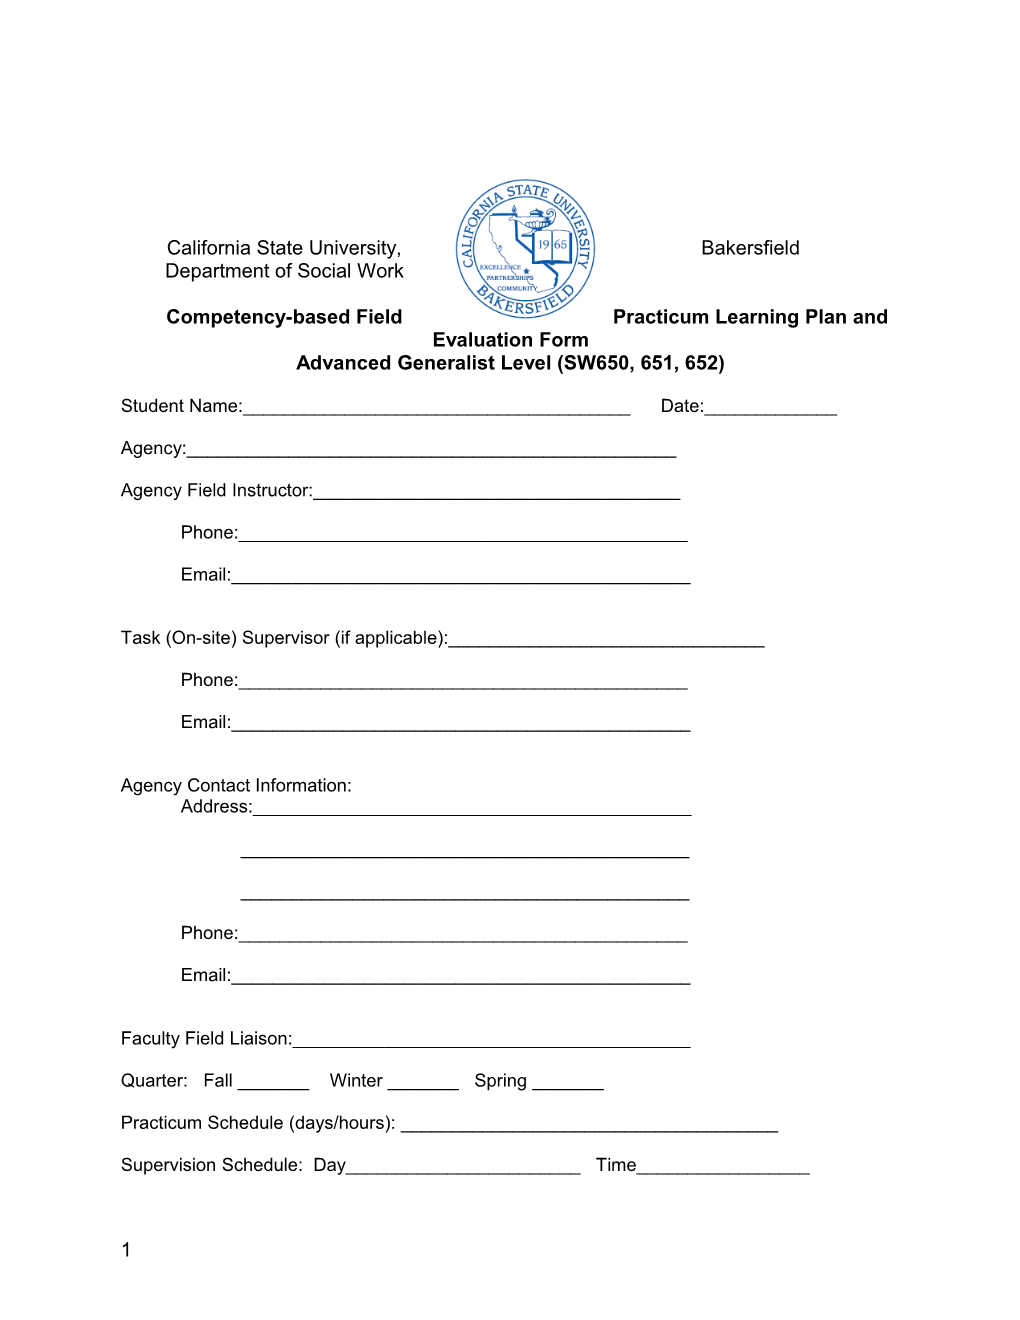 Competency-Based Field Practicum Learning Plan and Evaluation Form